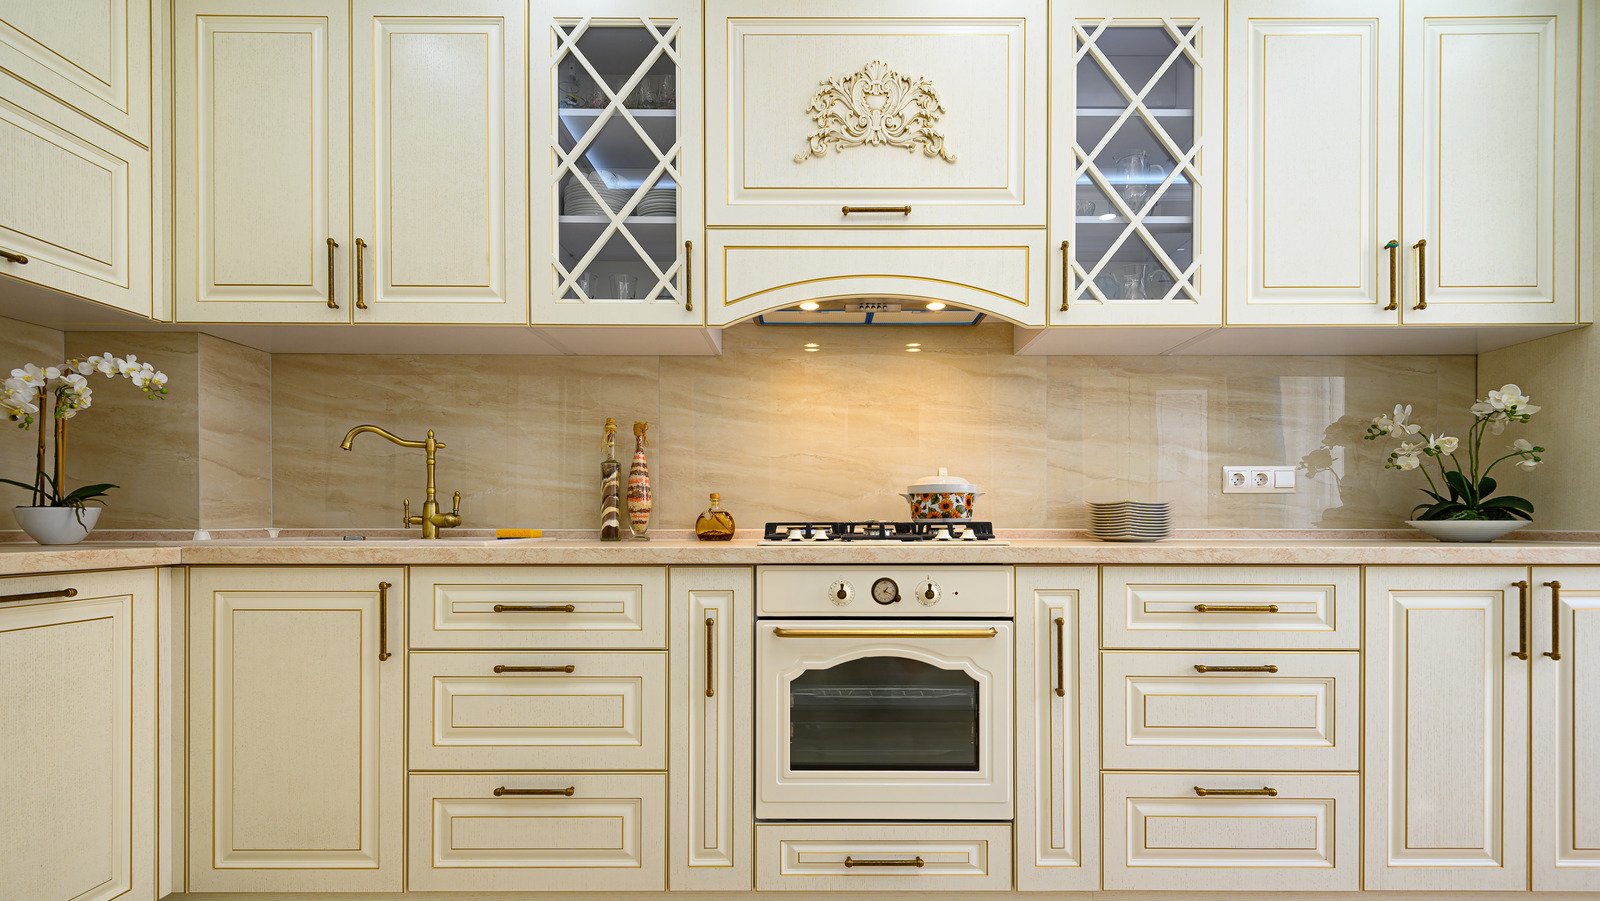 Do Your Kitchen Cabinets Need To Be Symmetrical?